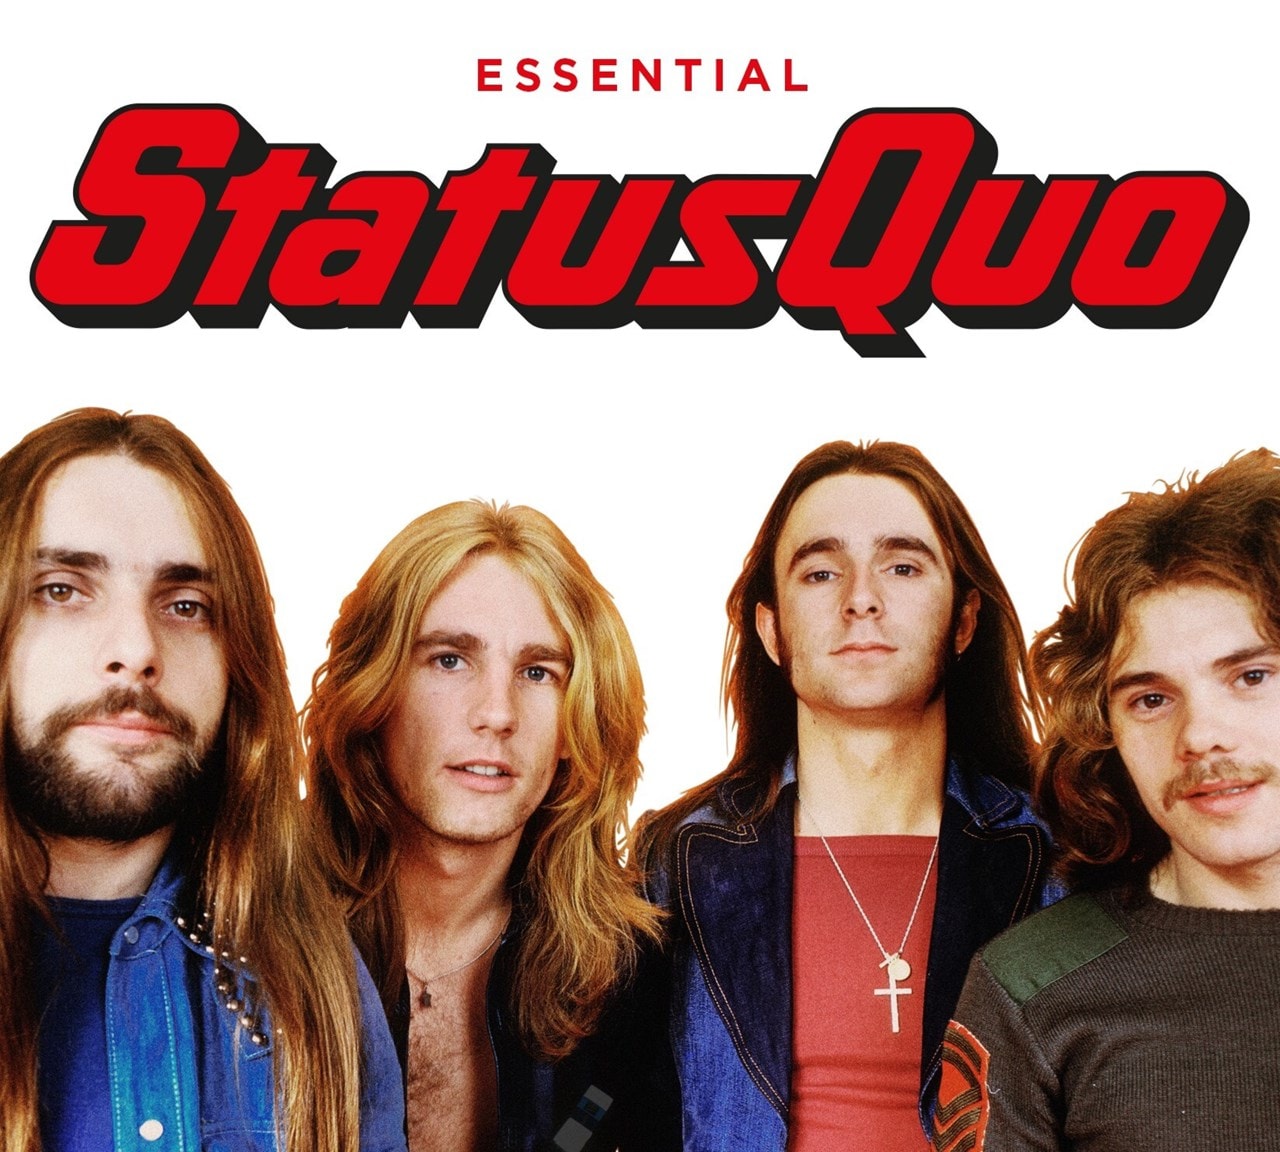 The Essential Status Quo | CD Box Set | Free shipping over £20 | HMV Store
